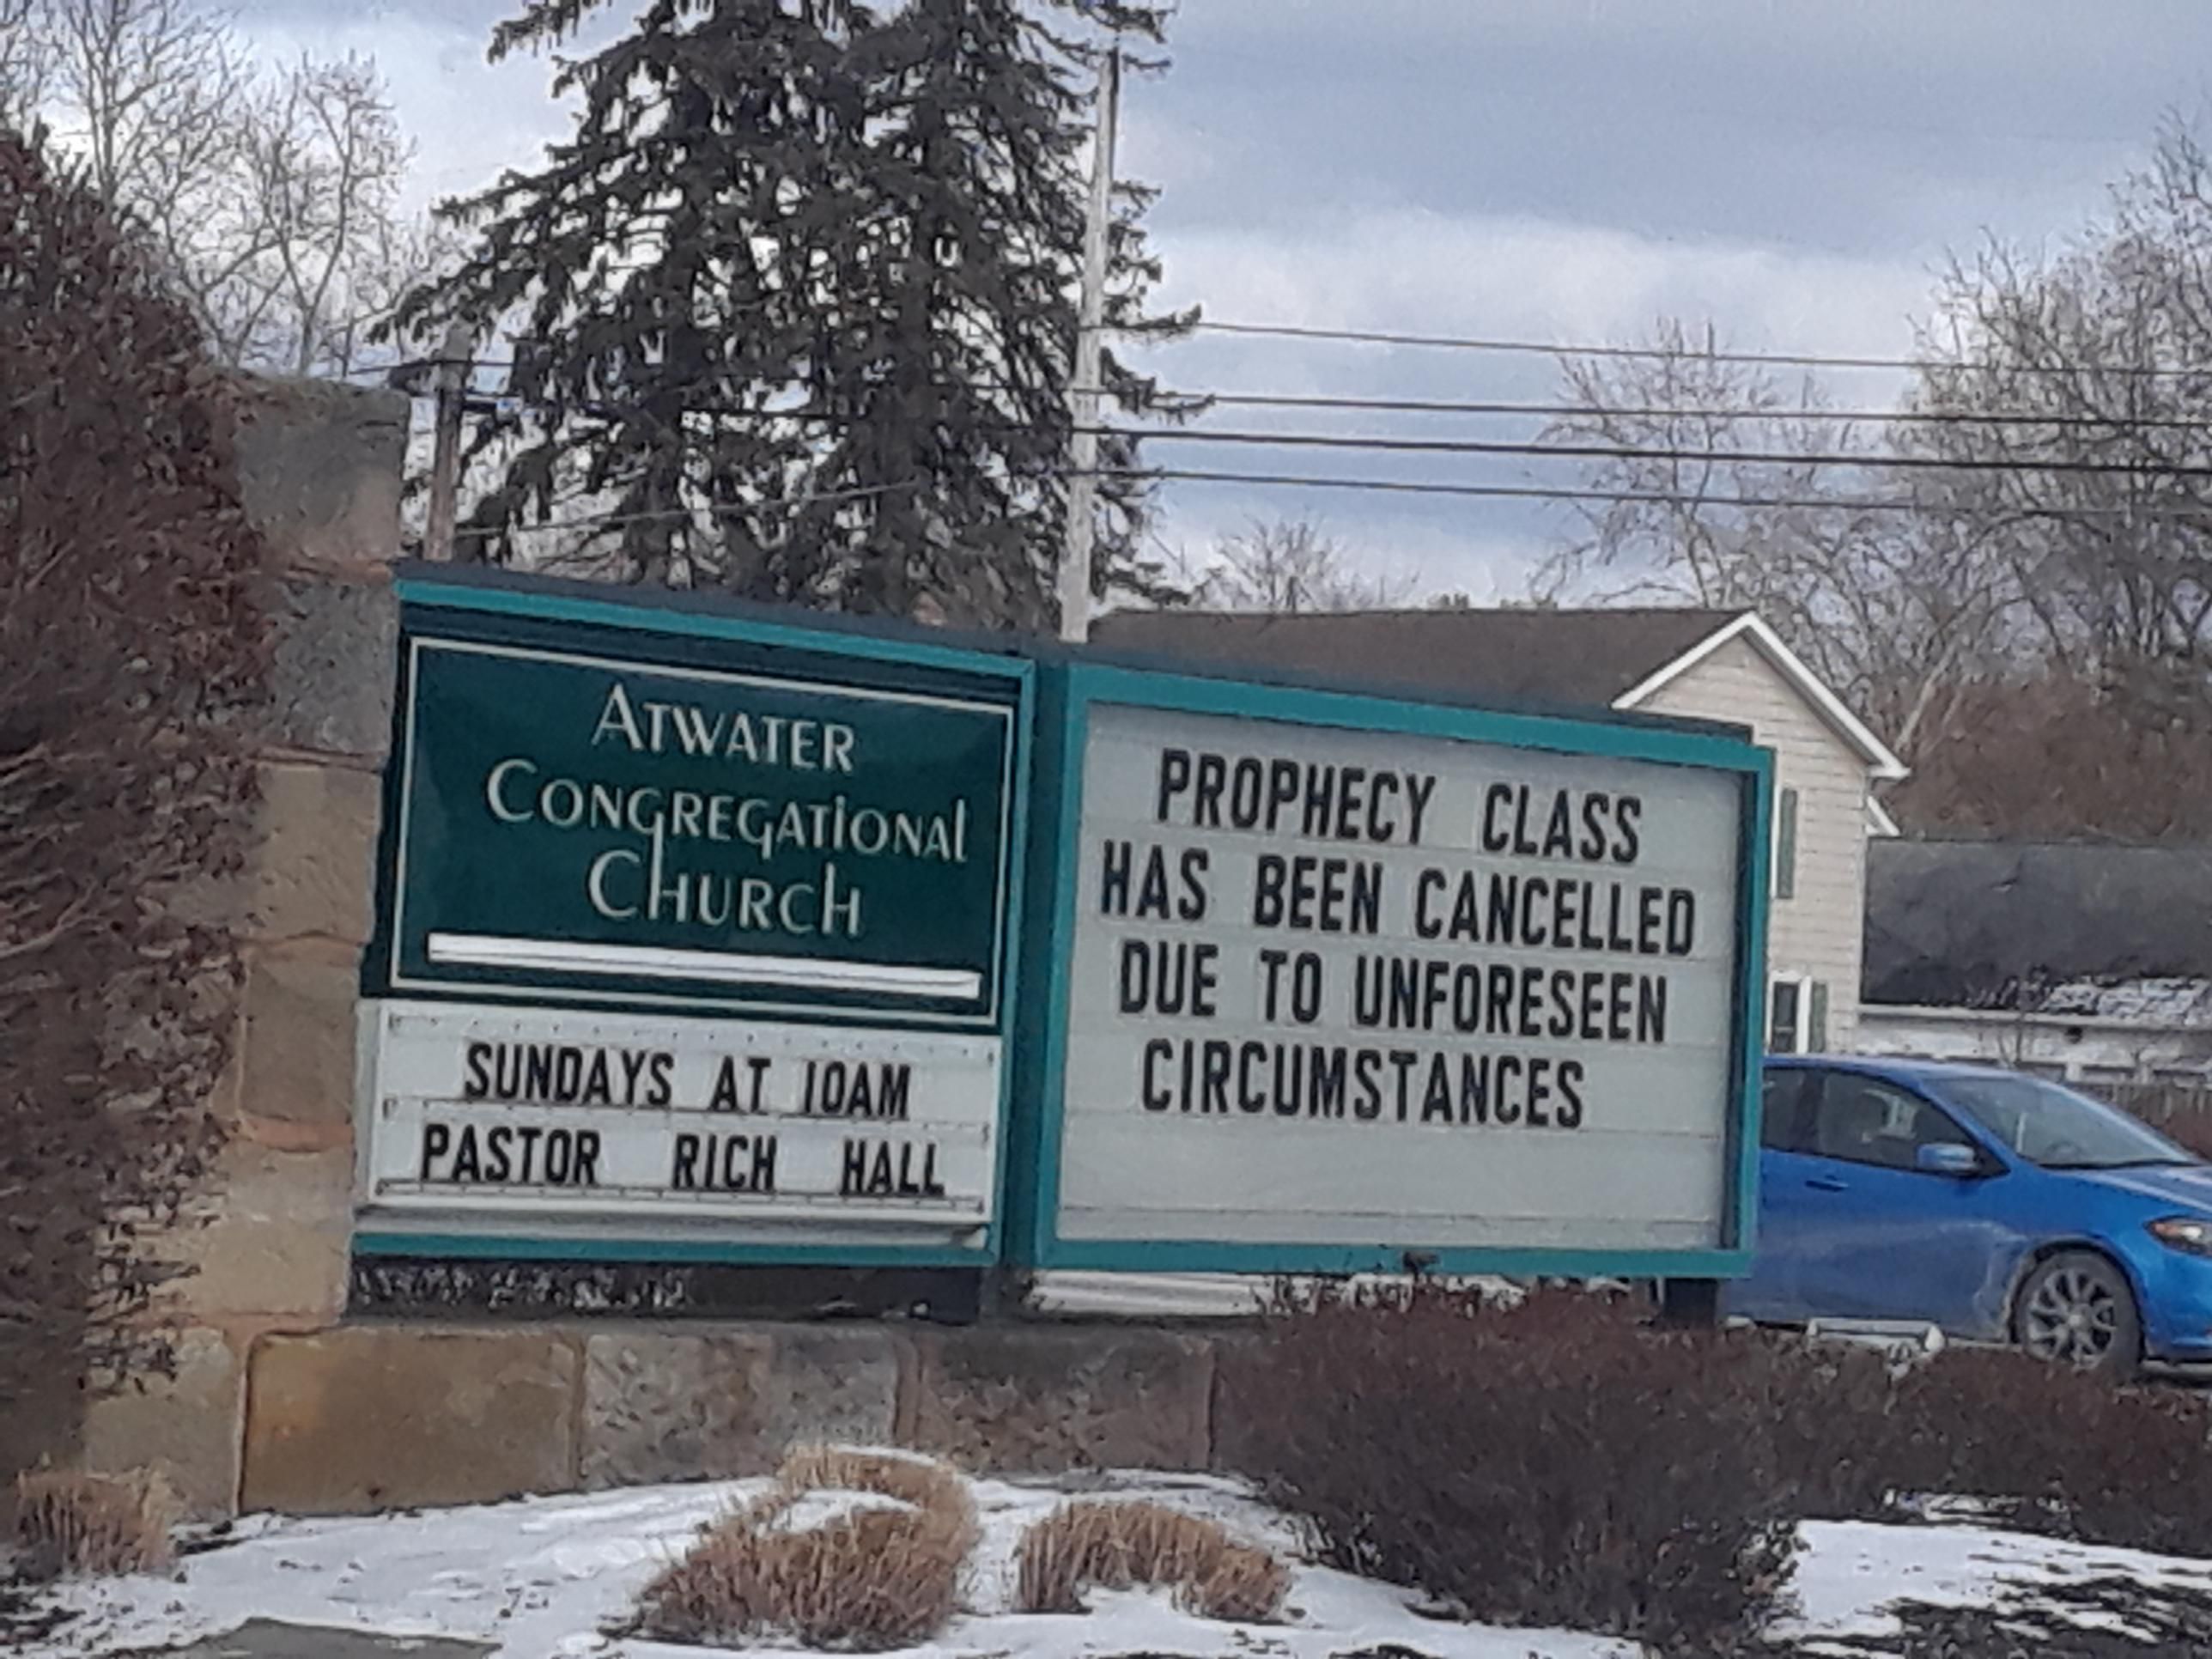 Our town church ofter has clever headlines.